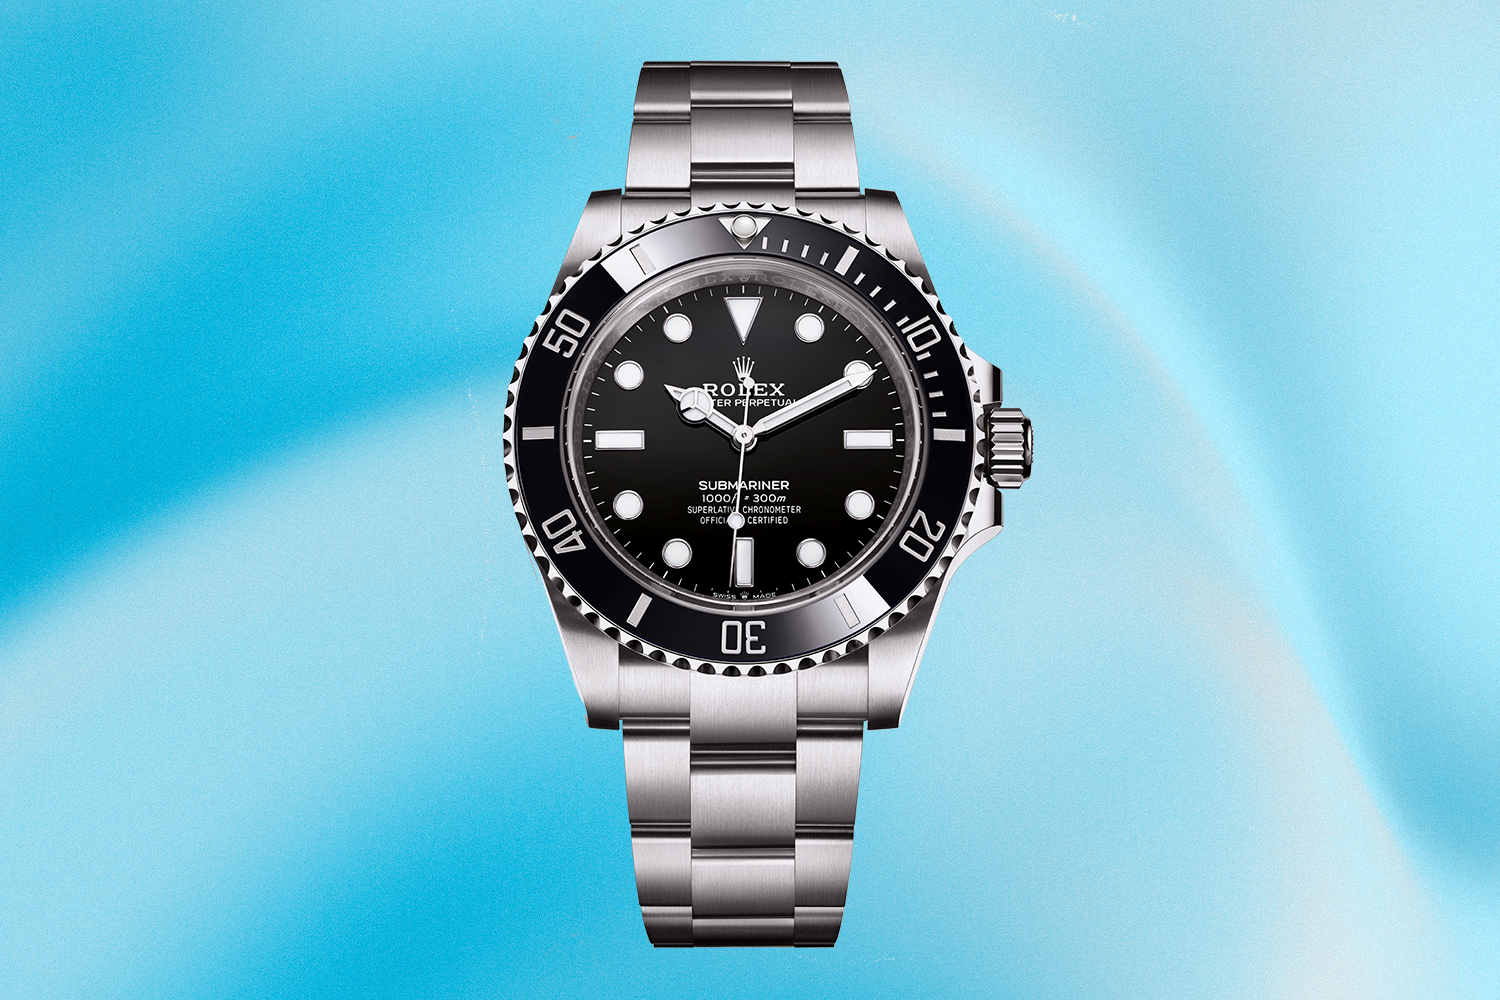 The new 2020 Rolex Oyster Perpetual Submariner ref. 124060